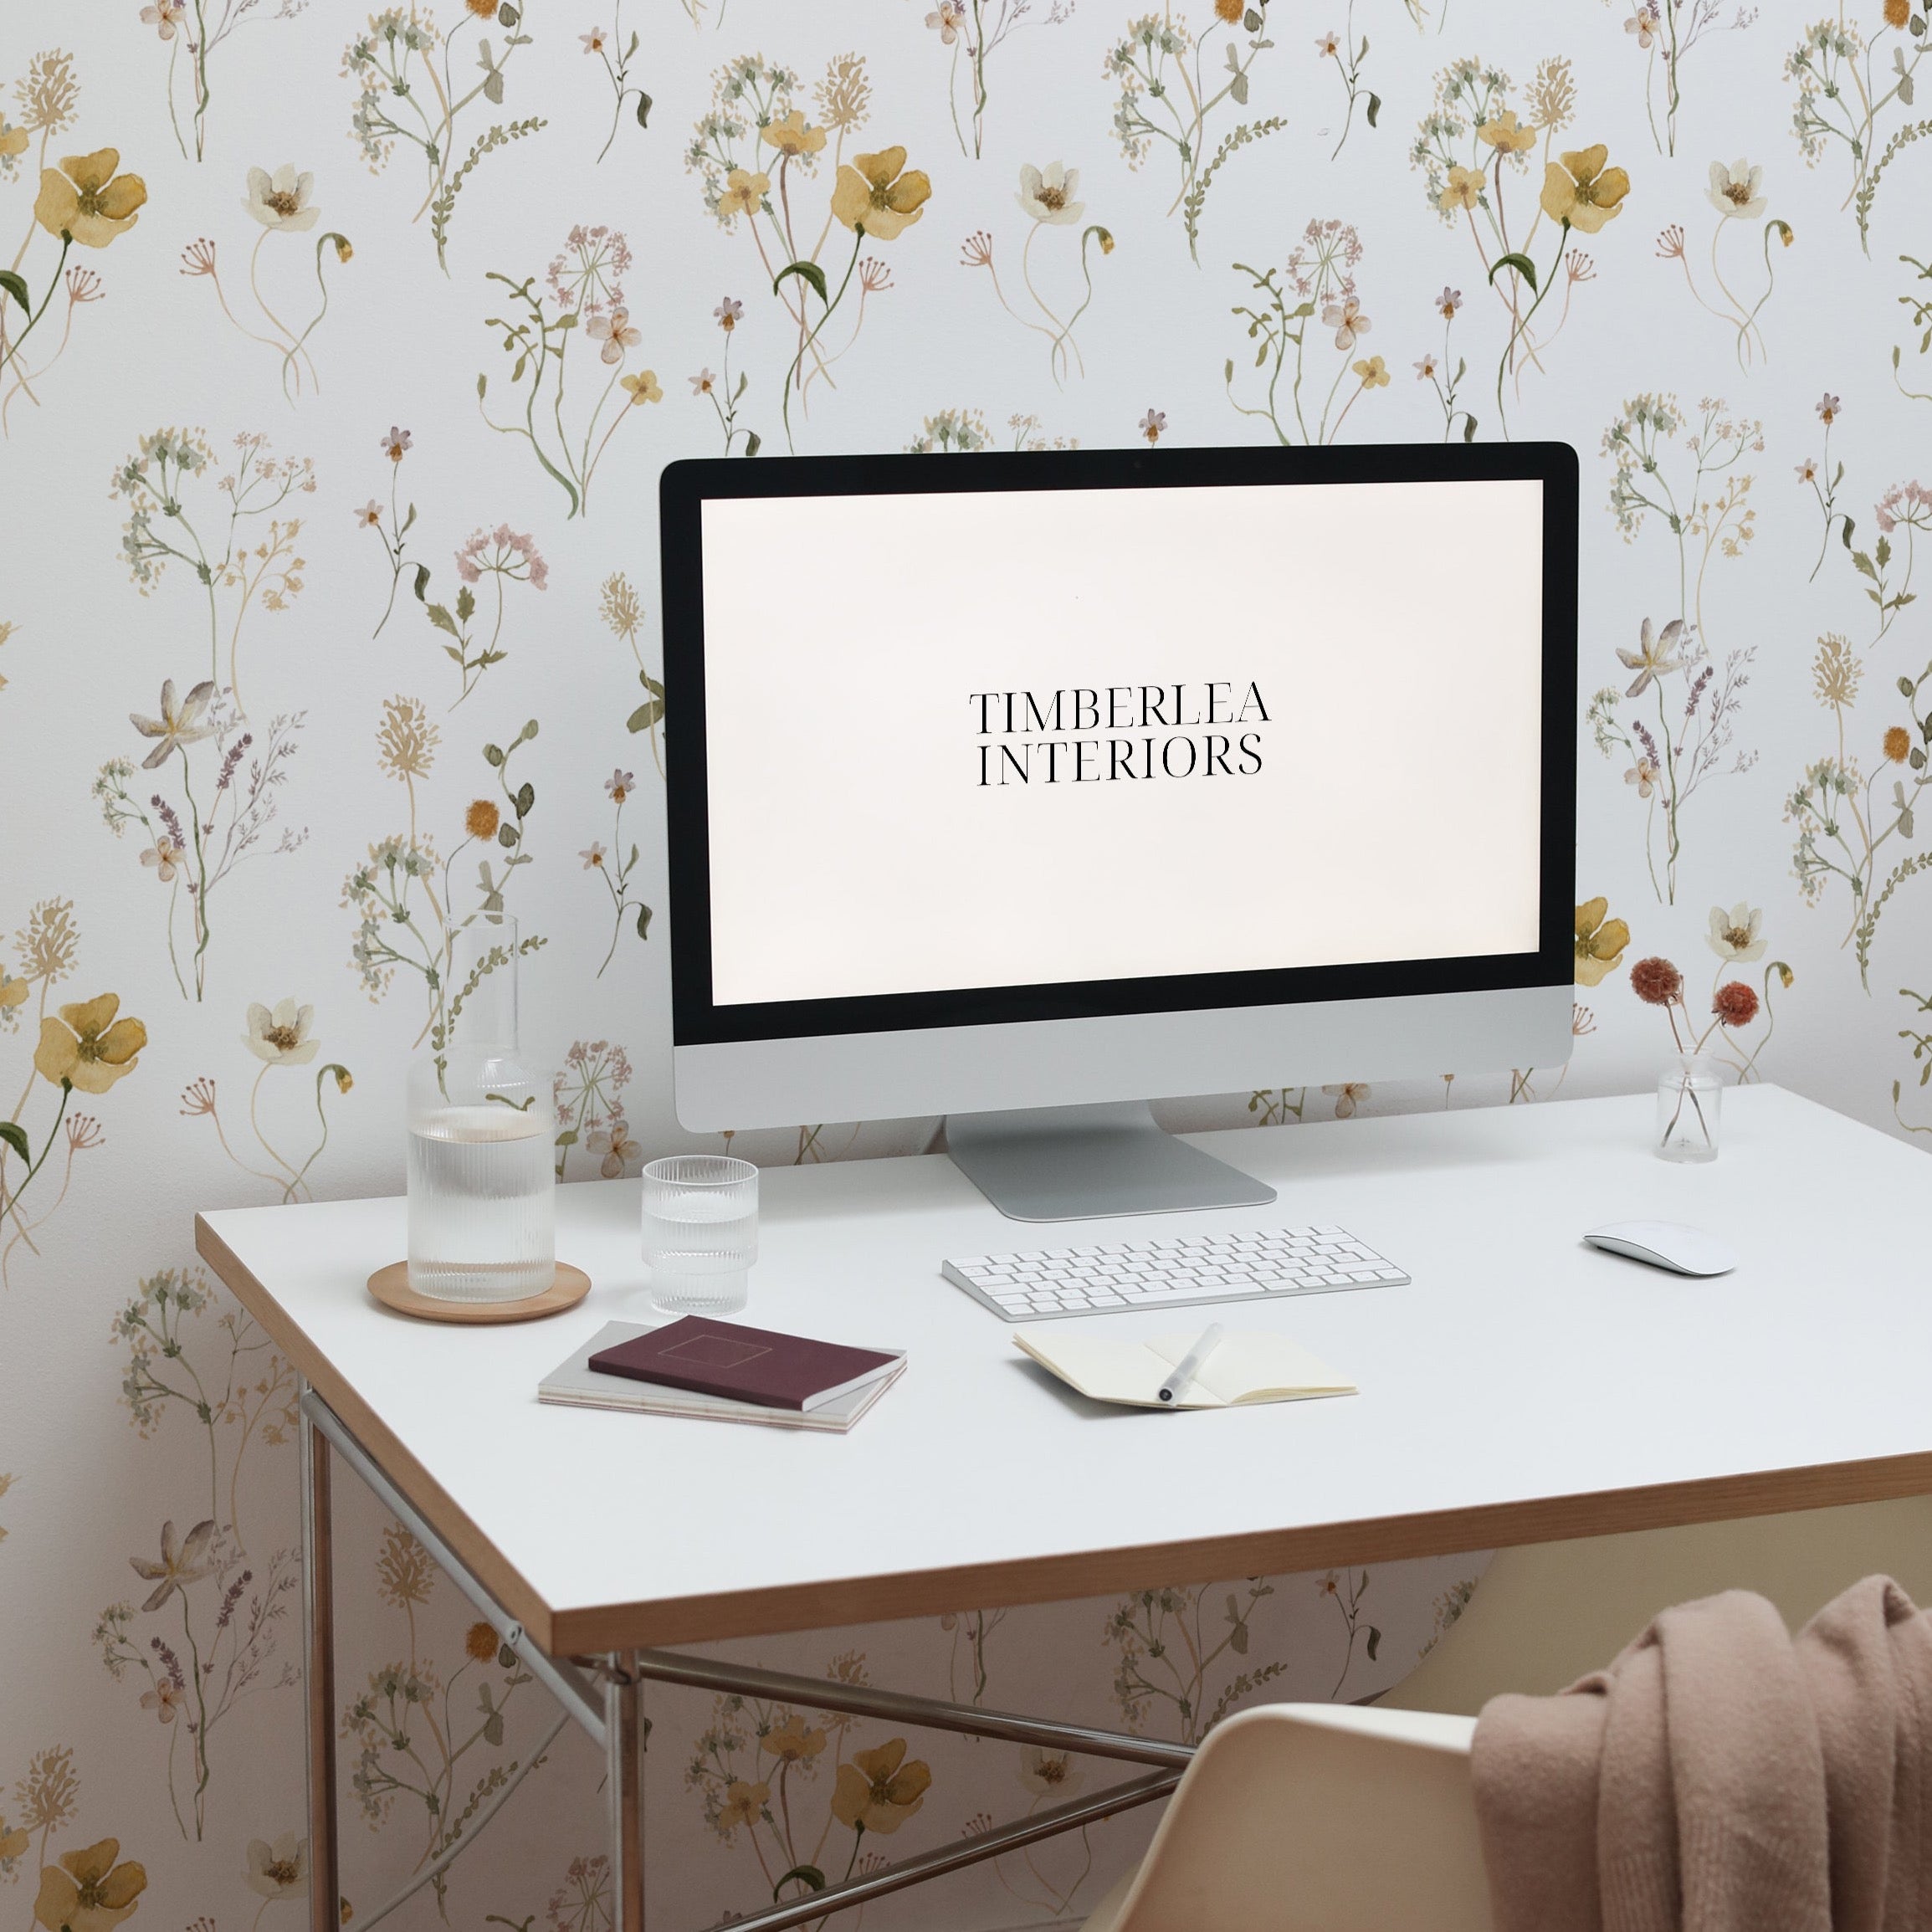 A modern home office brightened by the Delicate Floral Wallpaper, offering a calming floral pattern that creates a serene workspace.